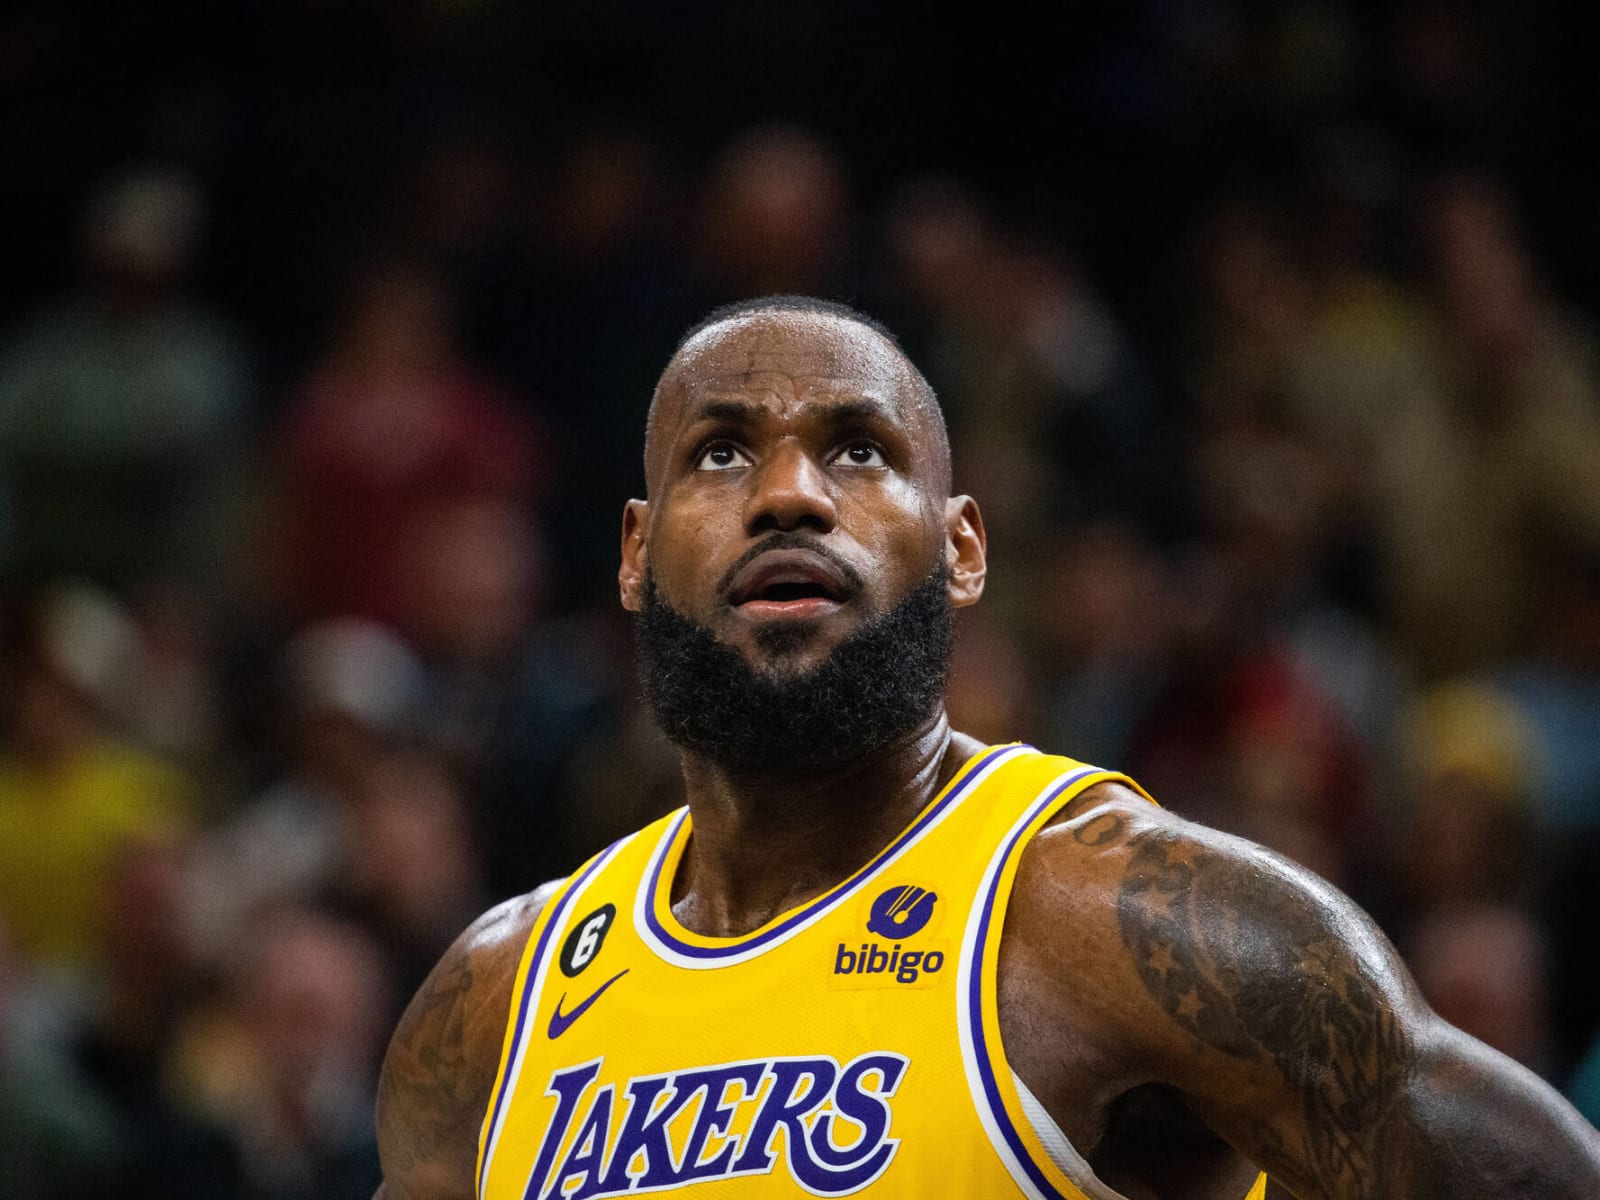 NBA - LeBron James and the Los Angeles Lakers have solidified the